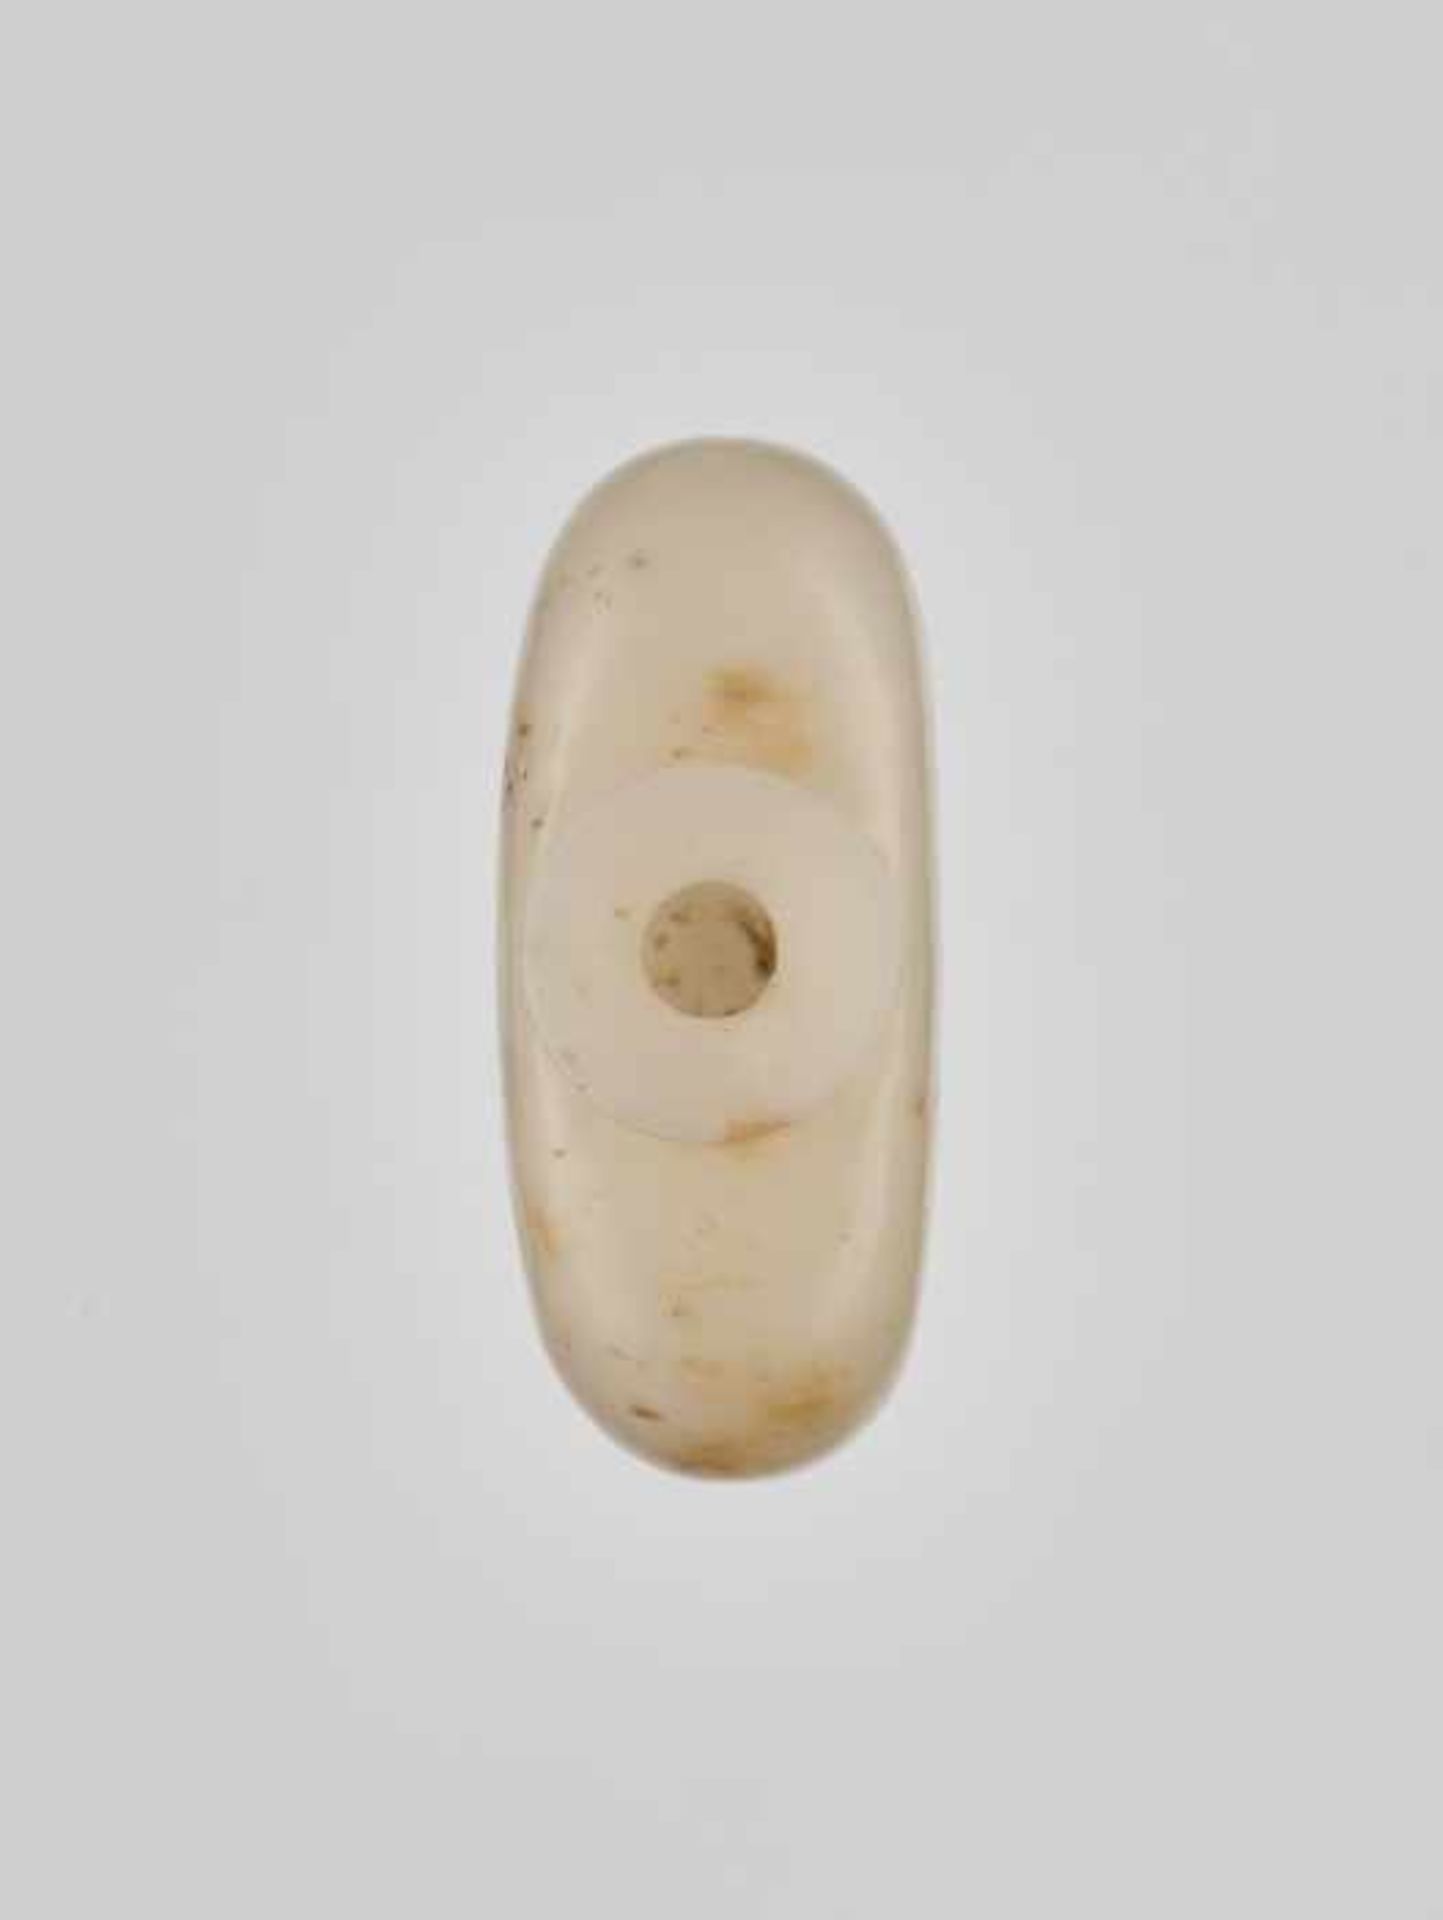 A PLAIN WHITE AND RUSSET CALCITE BOTTLE, 1780-1860 Opaque white calcite with russet streaks and - Image 5 of 6